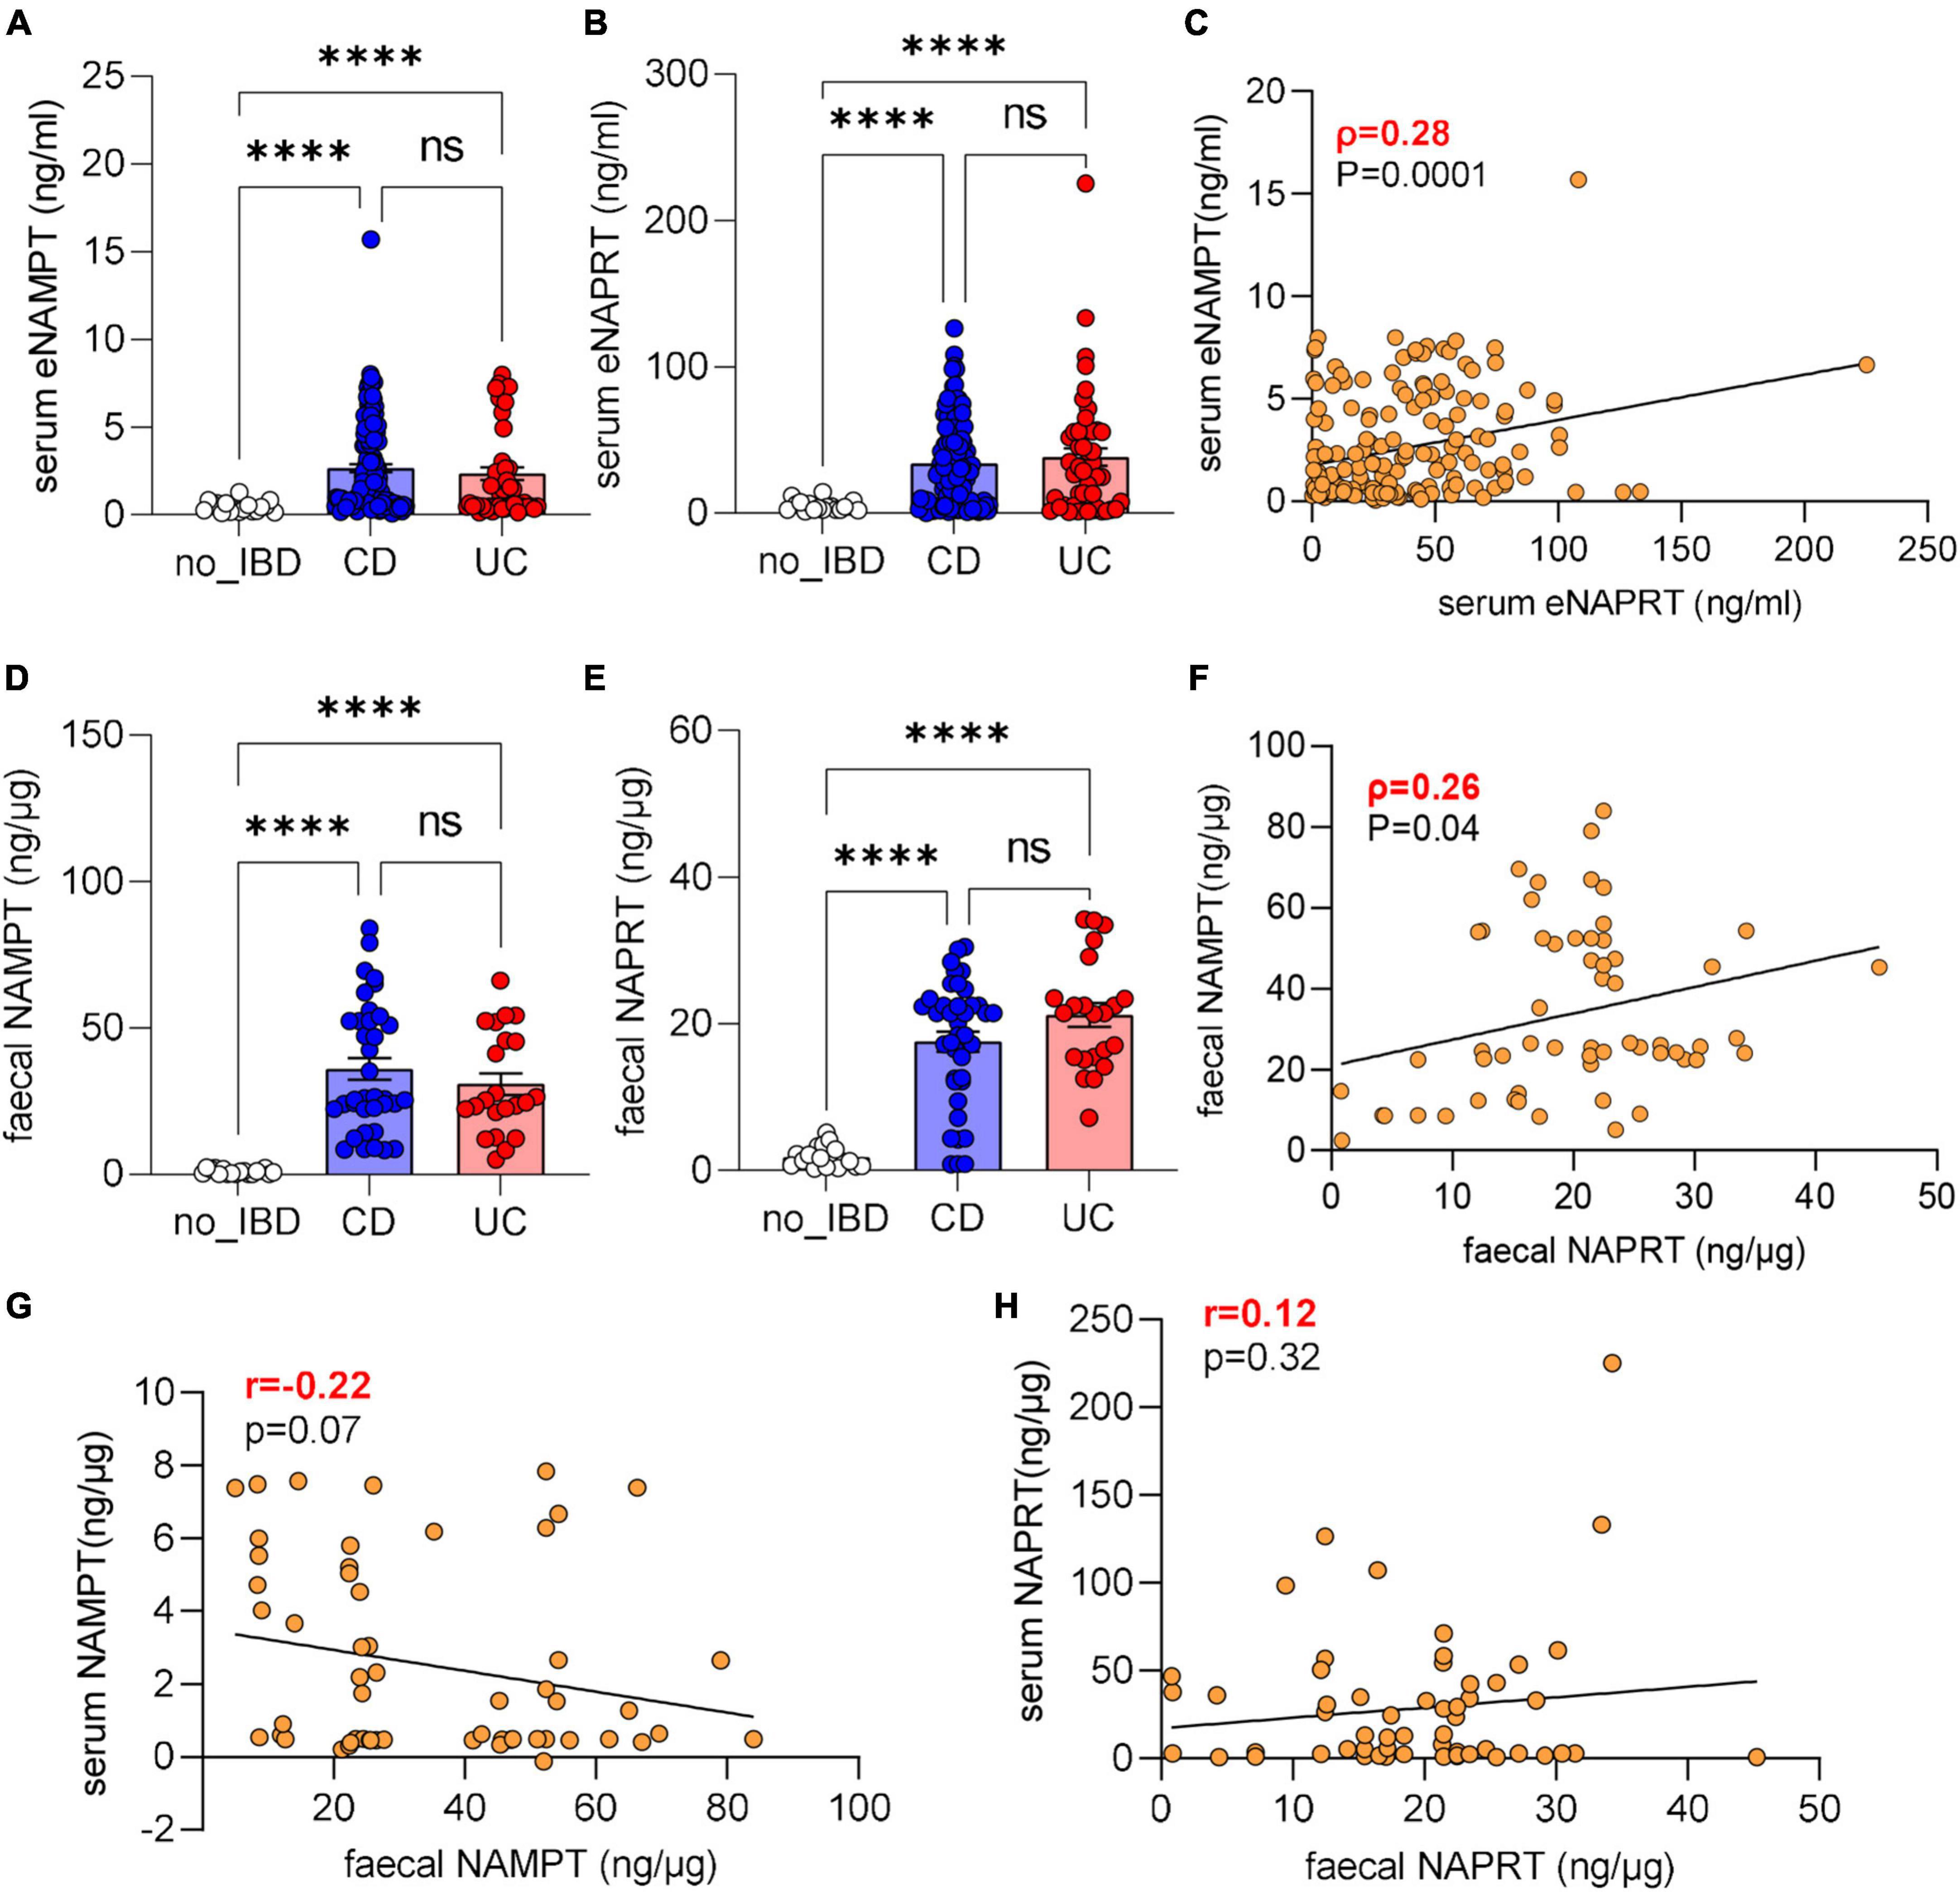 NAMPT and NAPRT serum levels predict response to anti-TNF therapy in inflammatory bowel disease